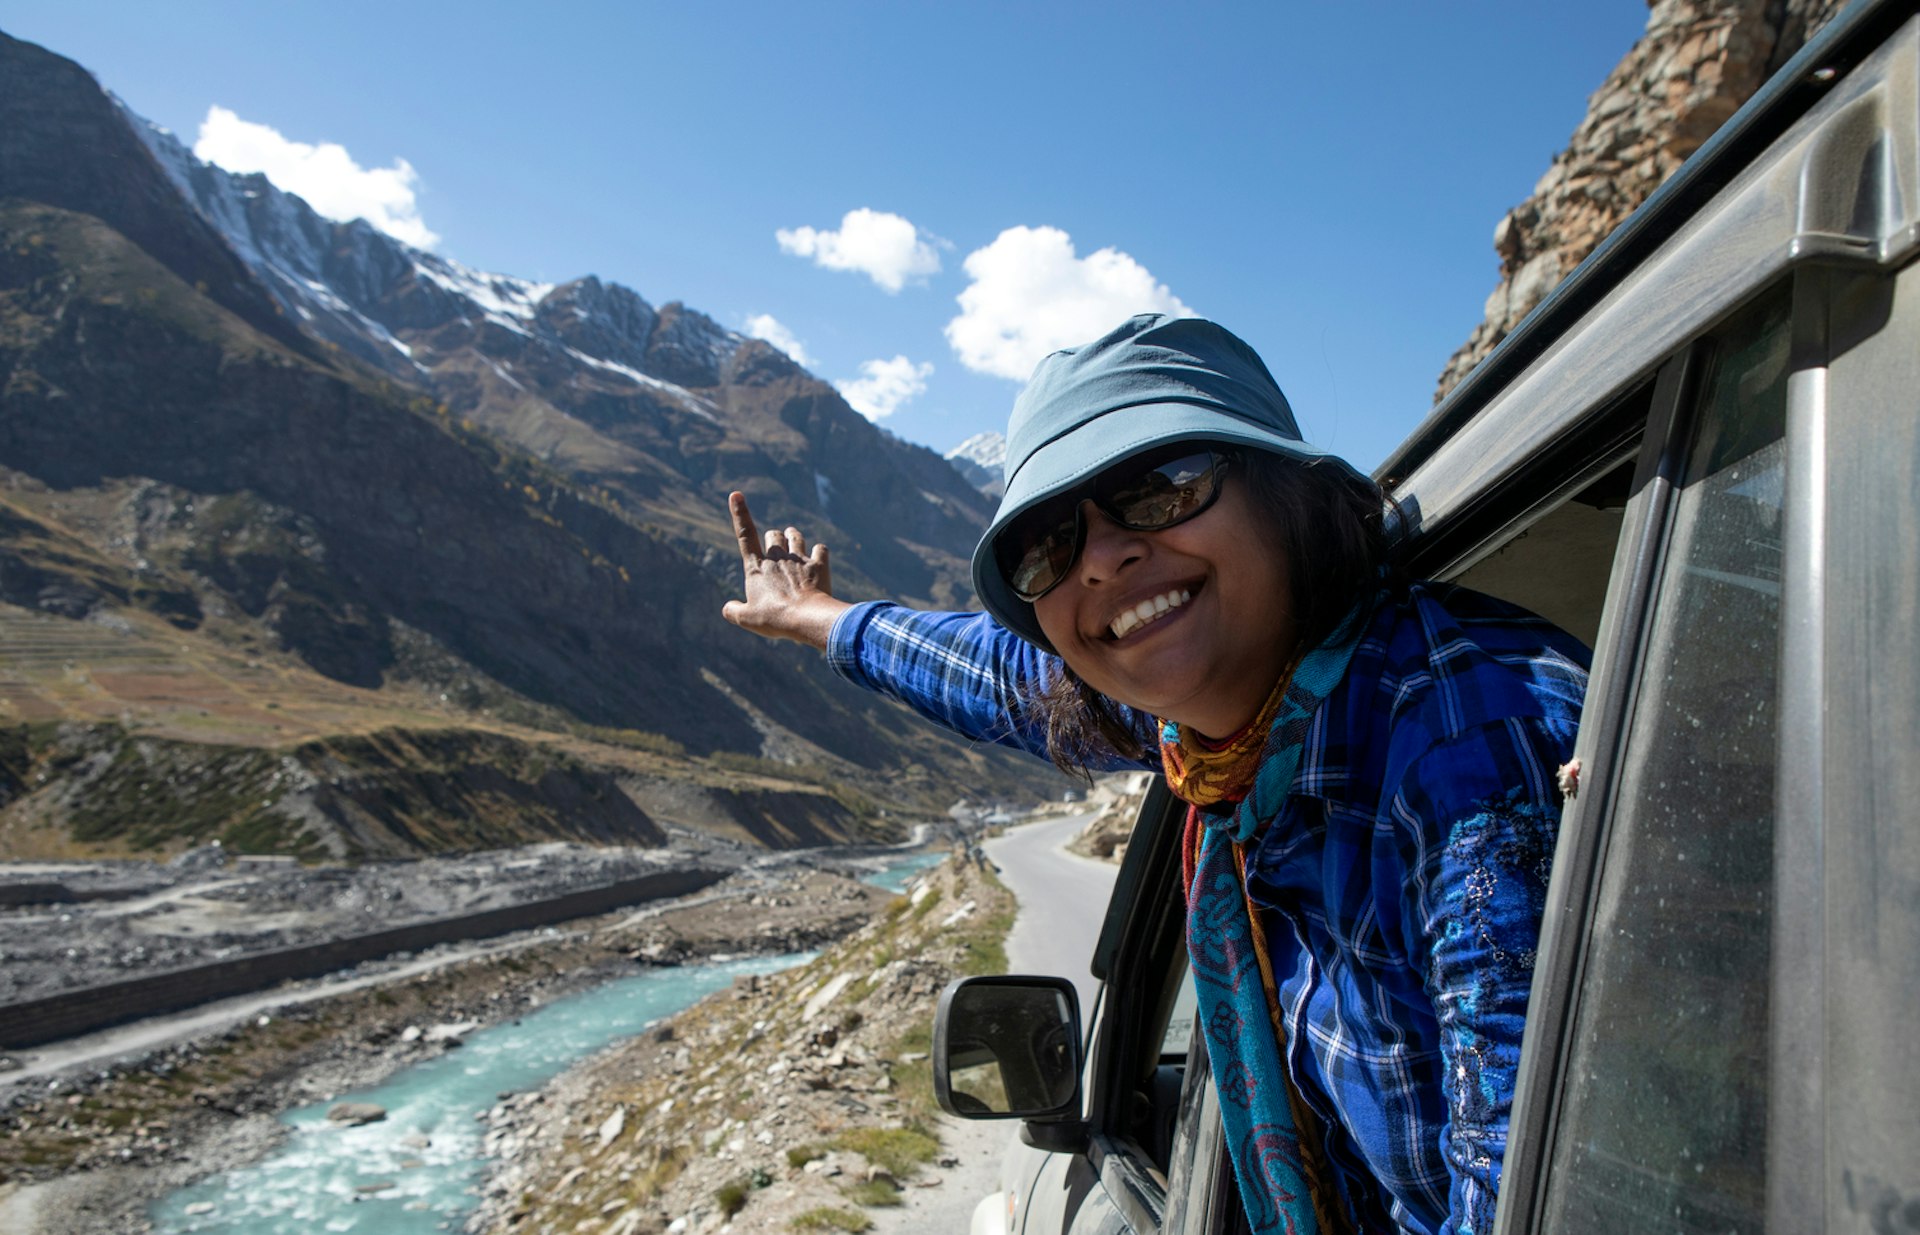 A woman smiles as she leans out the window of a vehicle and points to a blue river running alongside the road